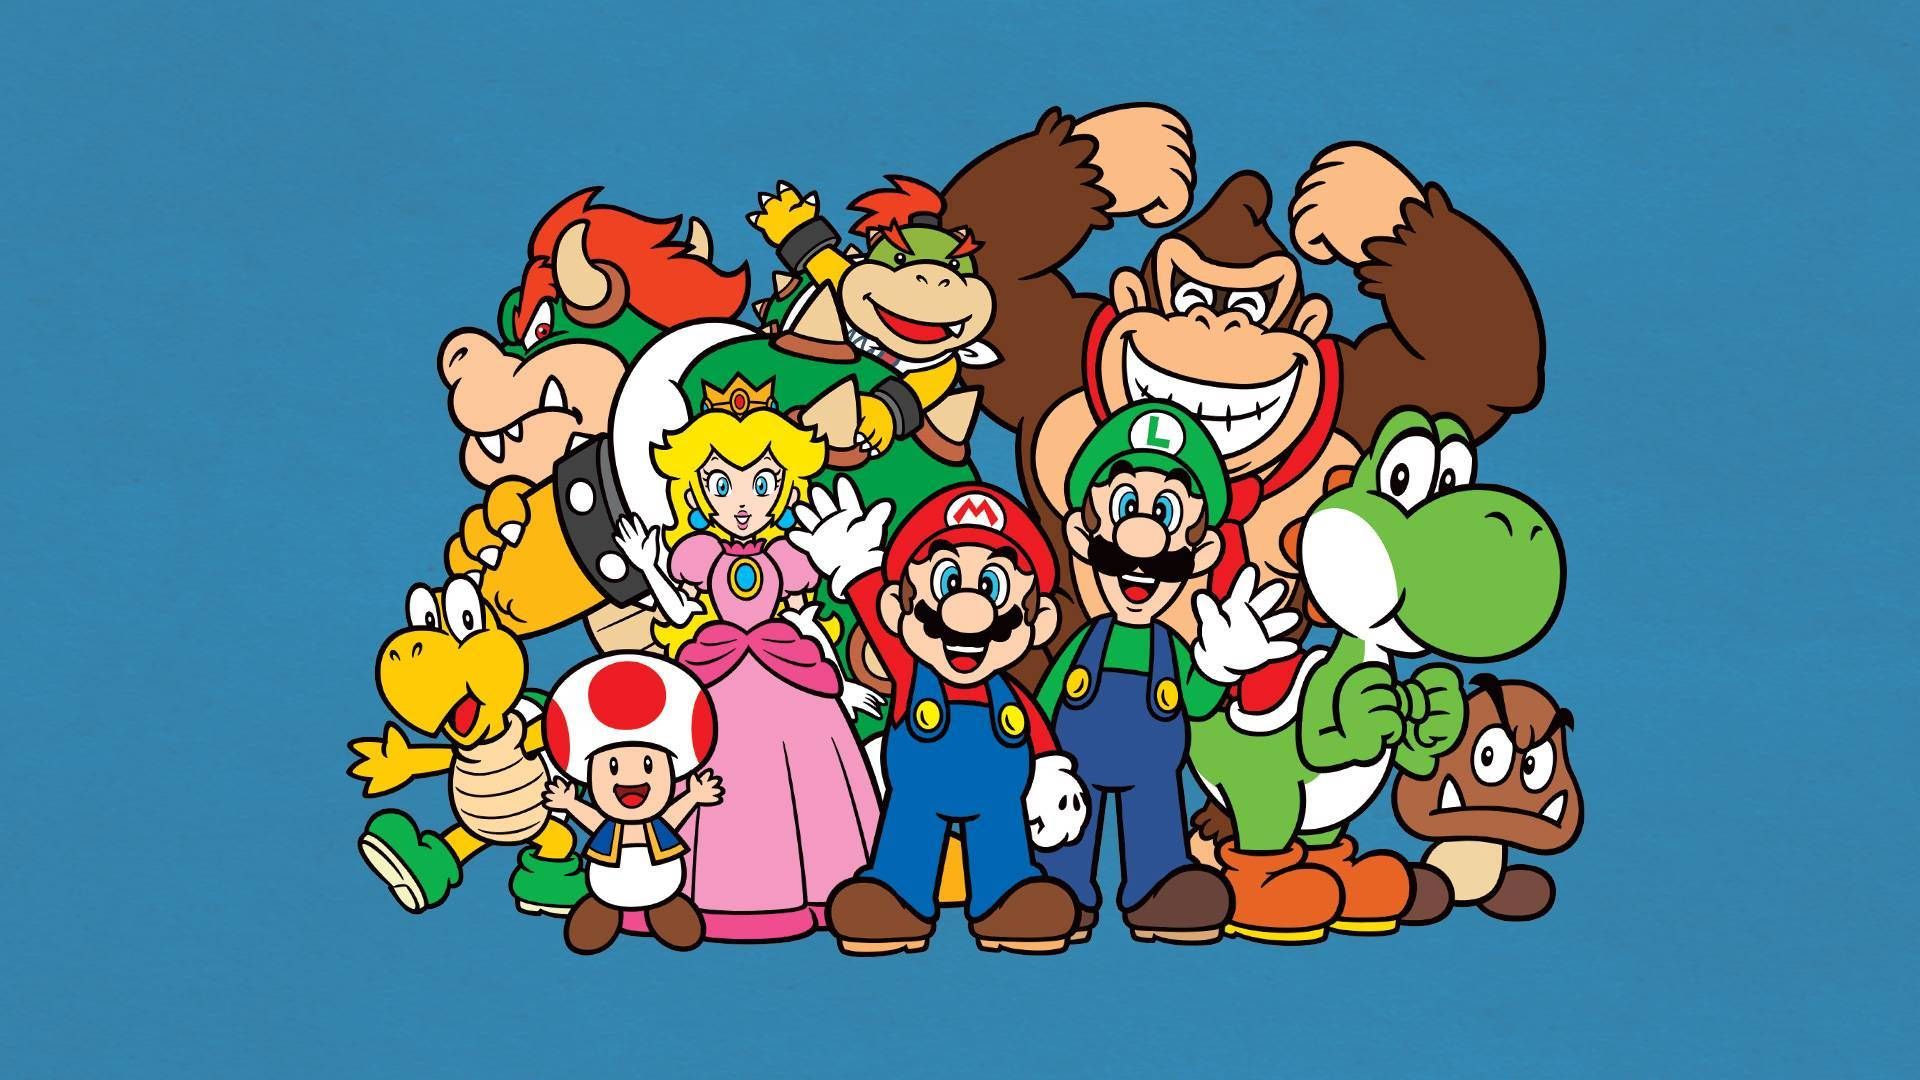 A group of nintendo characters are standing together - Nintendo